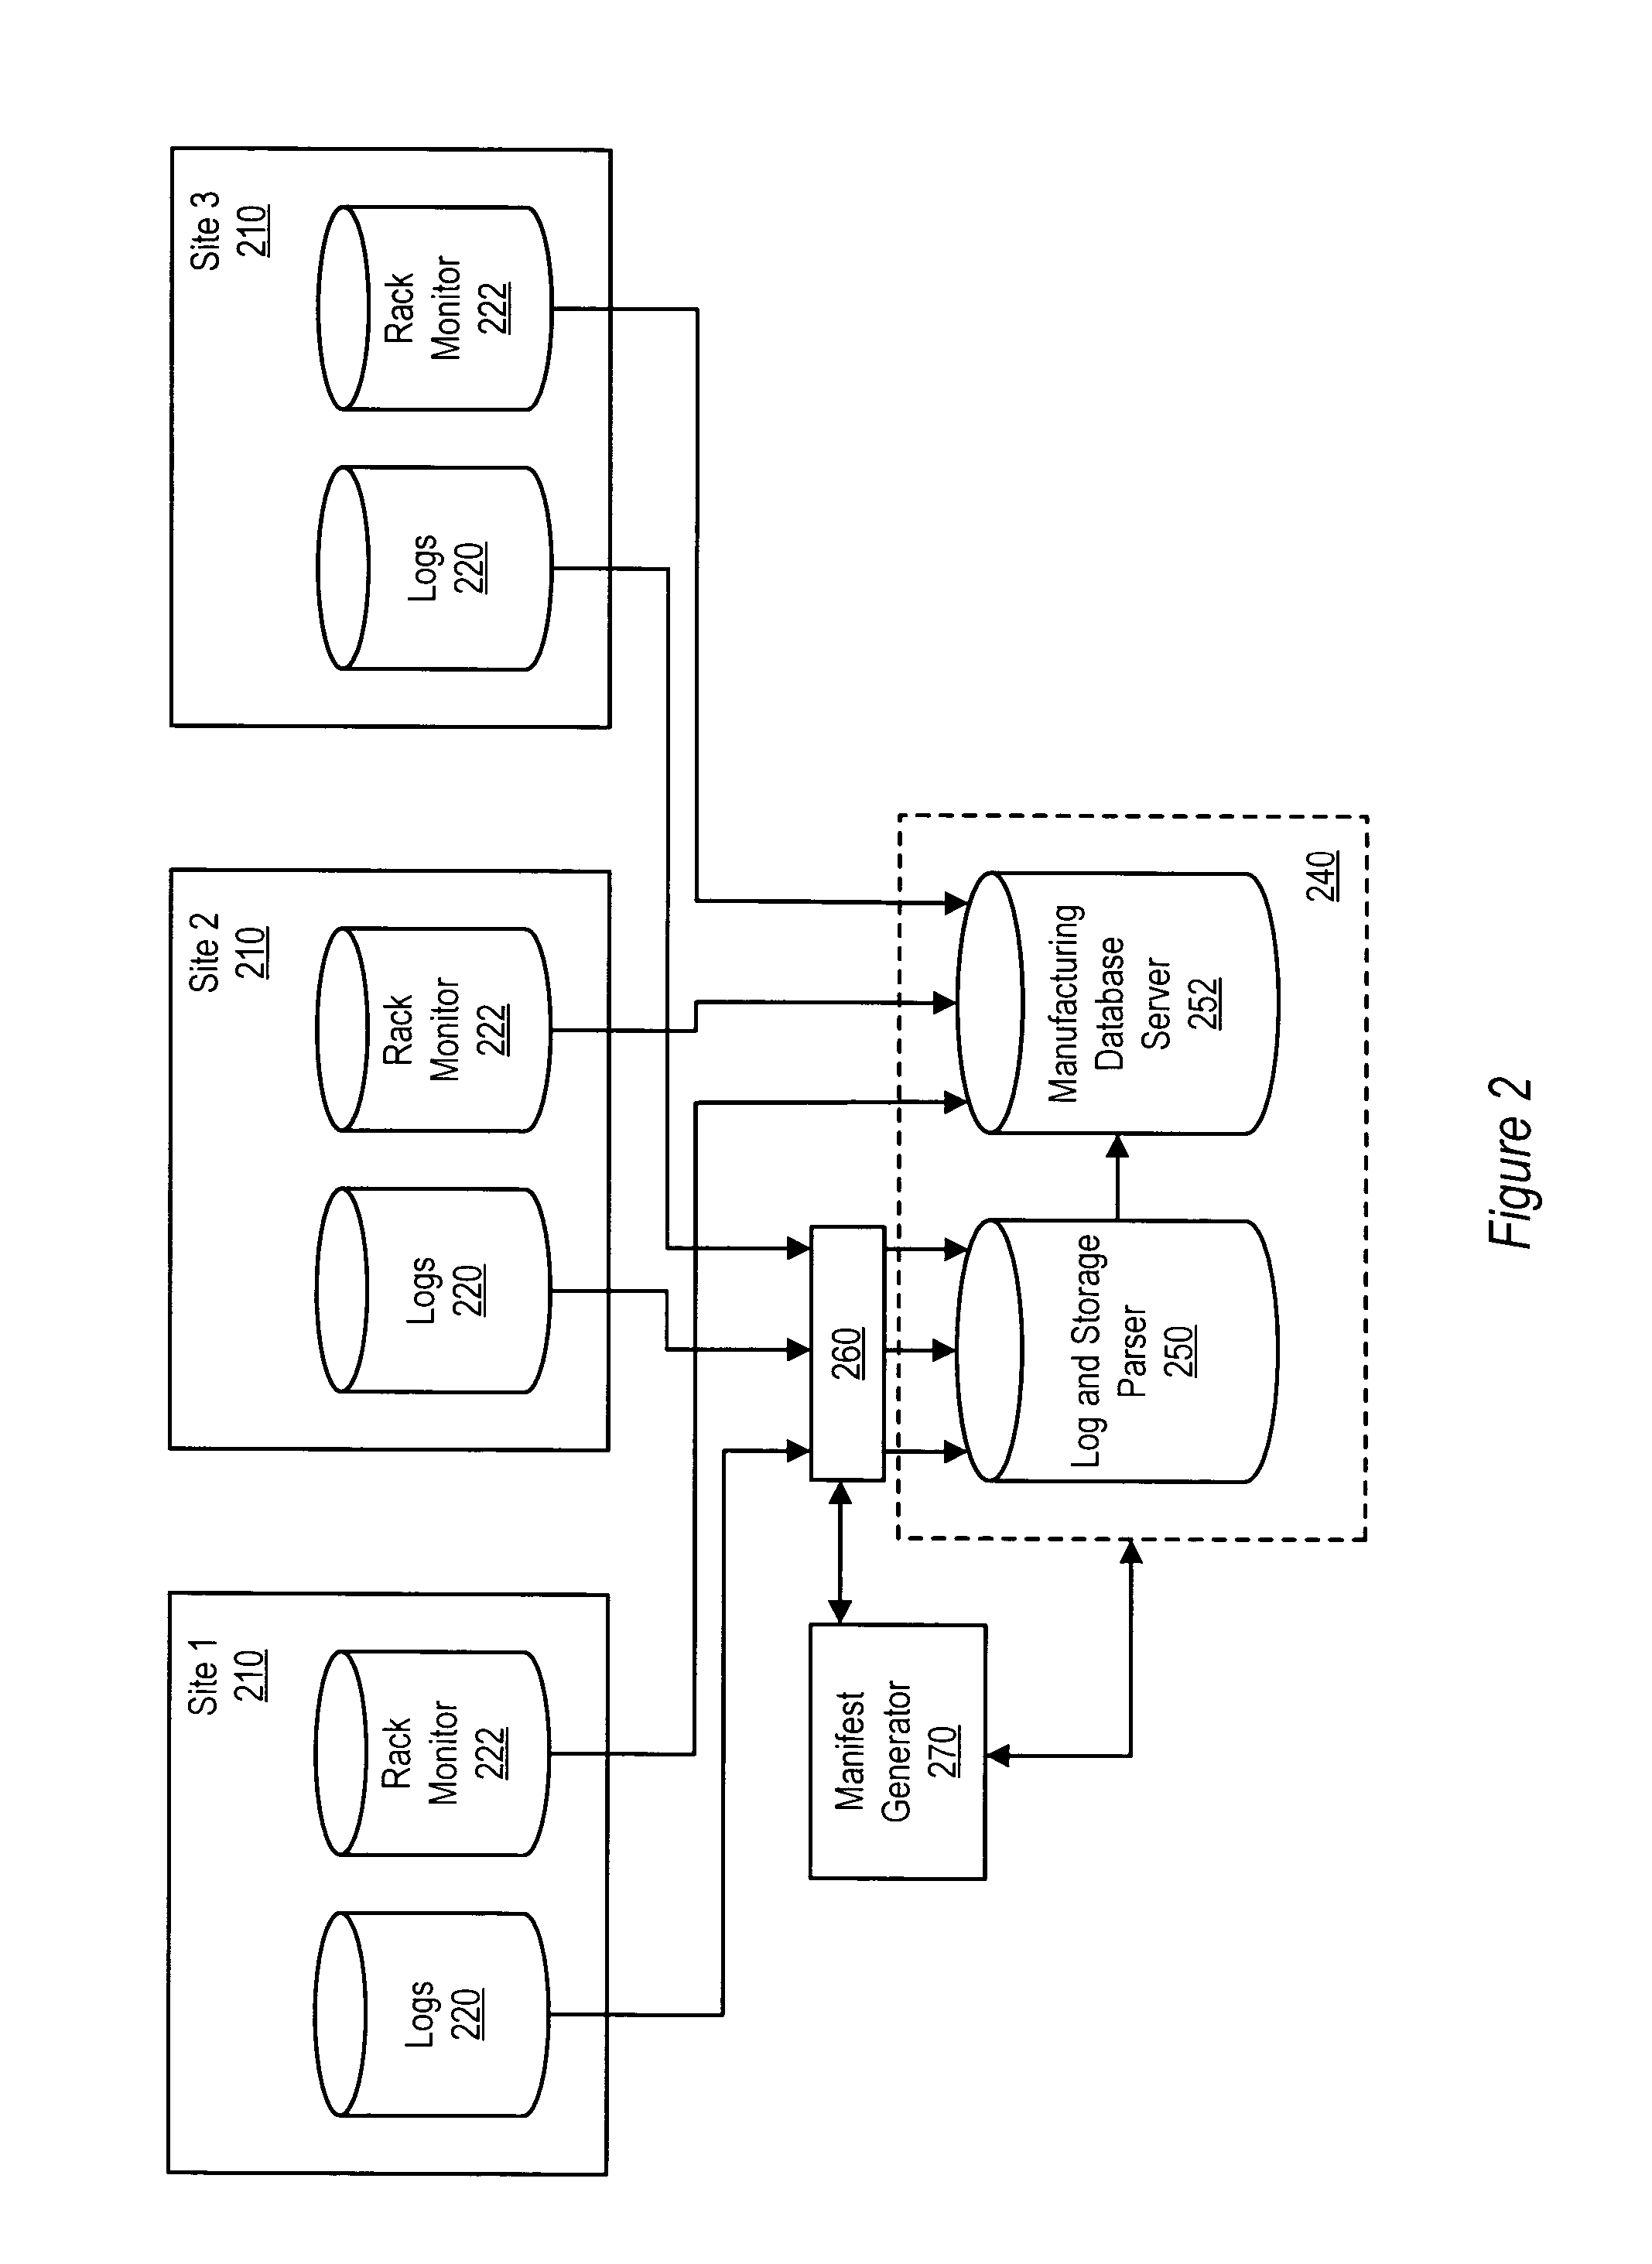 Integrated rapid install system for generic software images